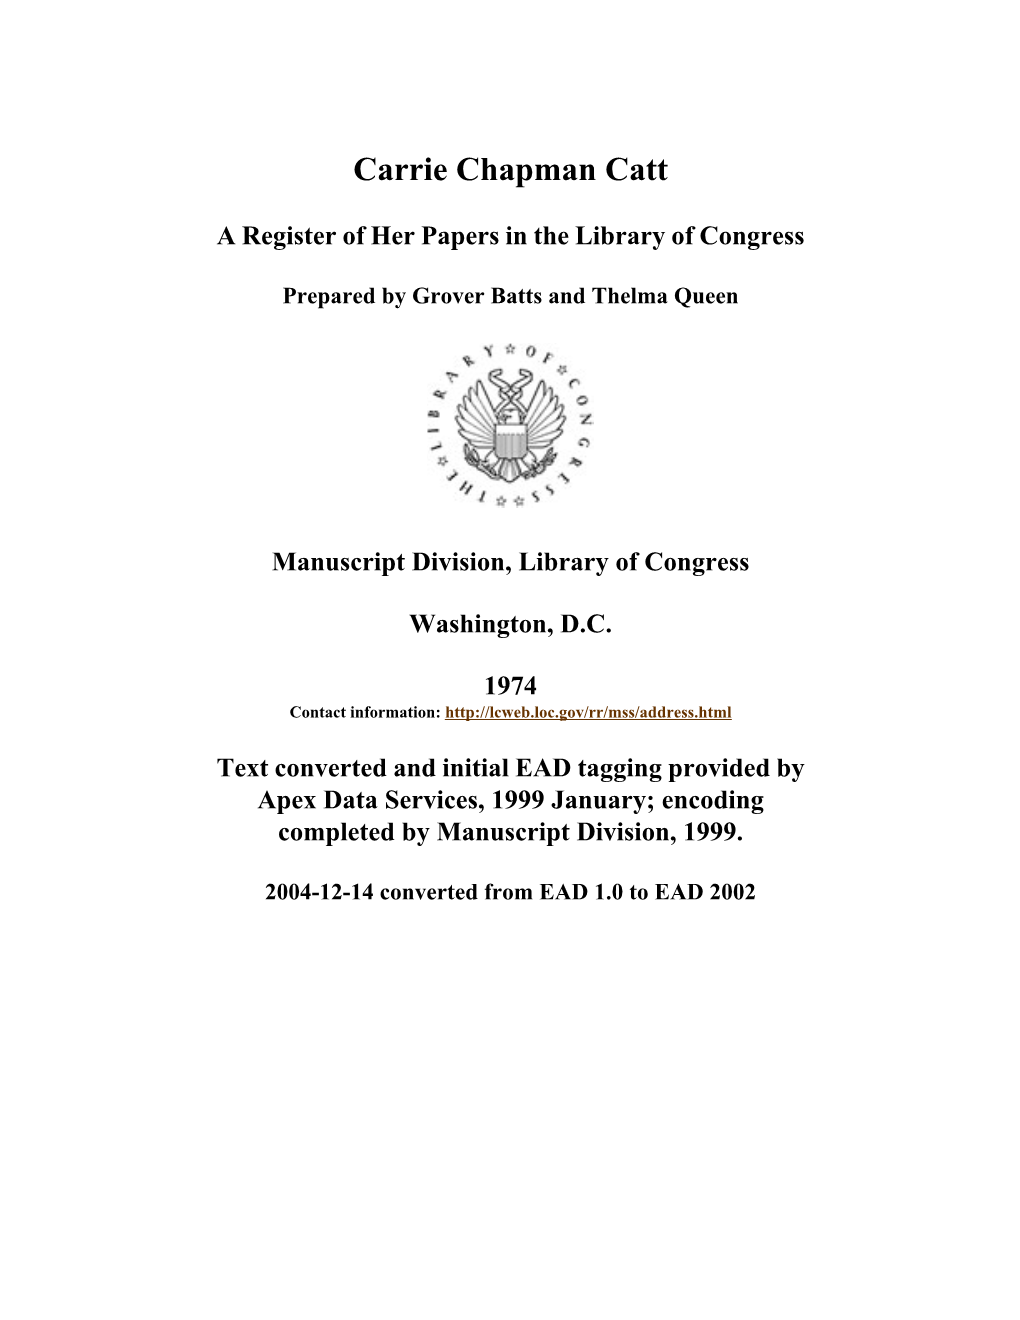 Papers of Carrie Chapman Catt [Finding Aid